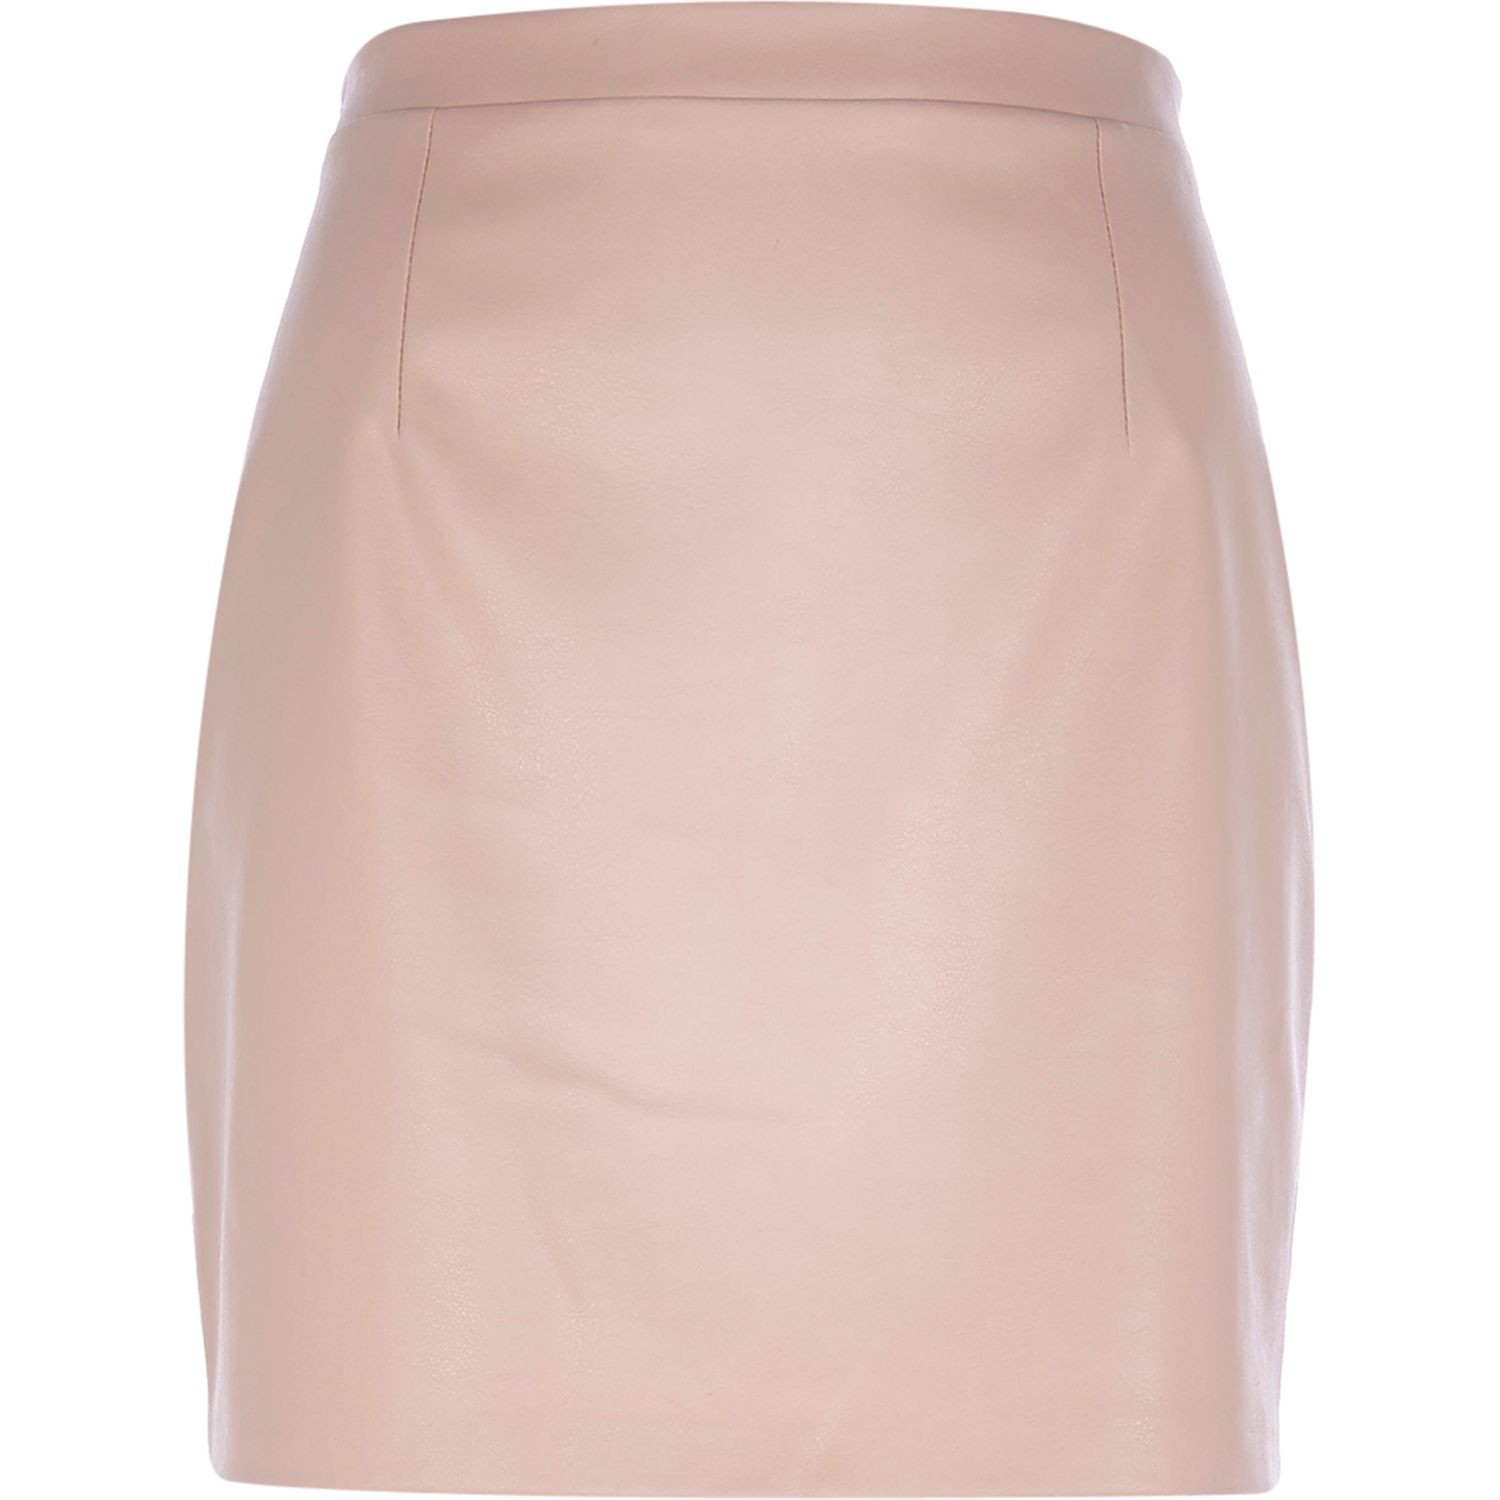 River island Light Pink Leather-Look Mini Skirt in Pink | Lyst